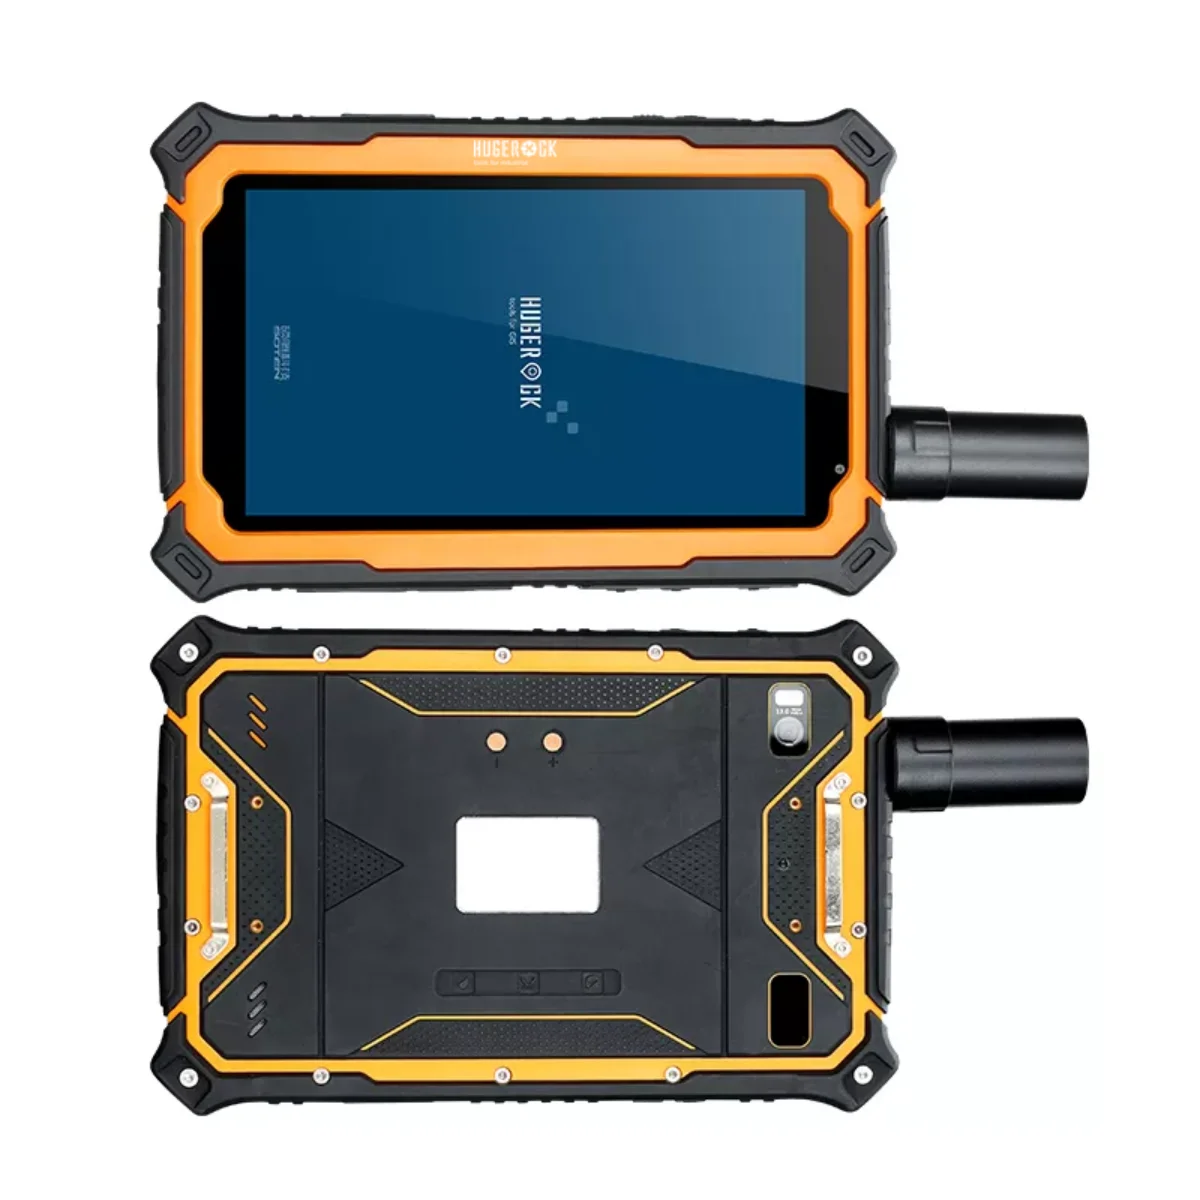 

T71KL industrial rugged android tablet pc computer 7 inch pda ruggedized battery gnss measurement gps rtk